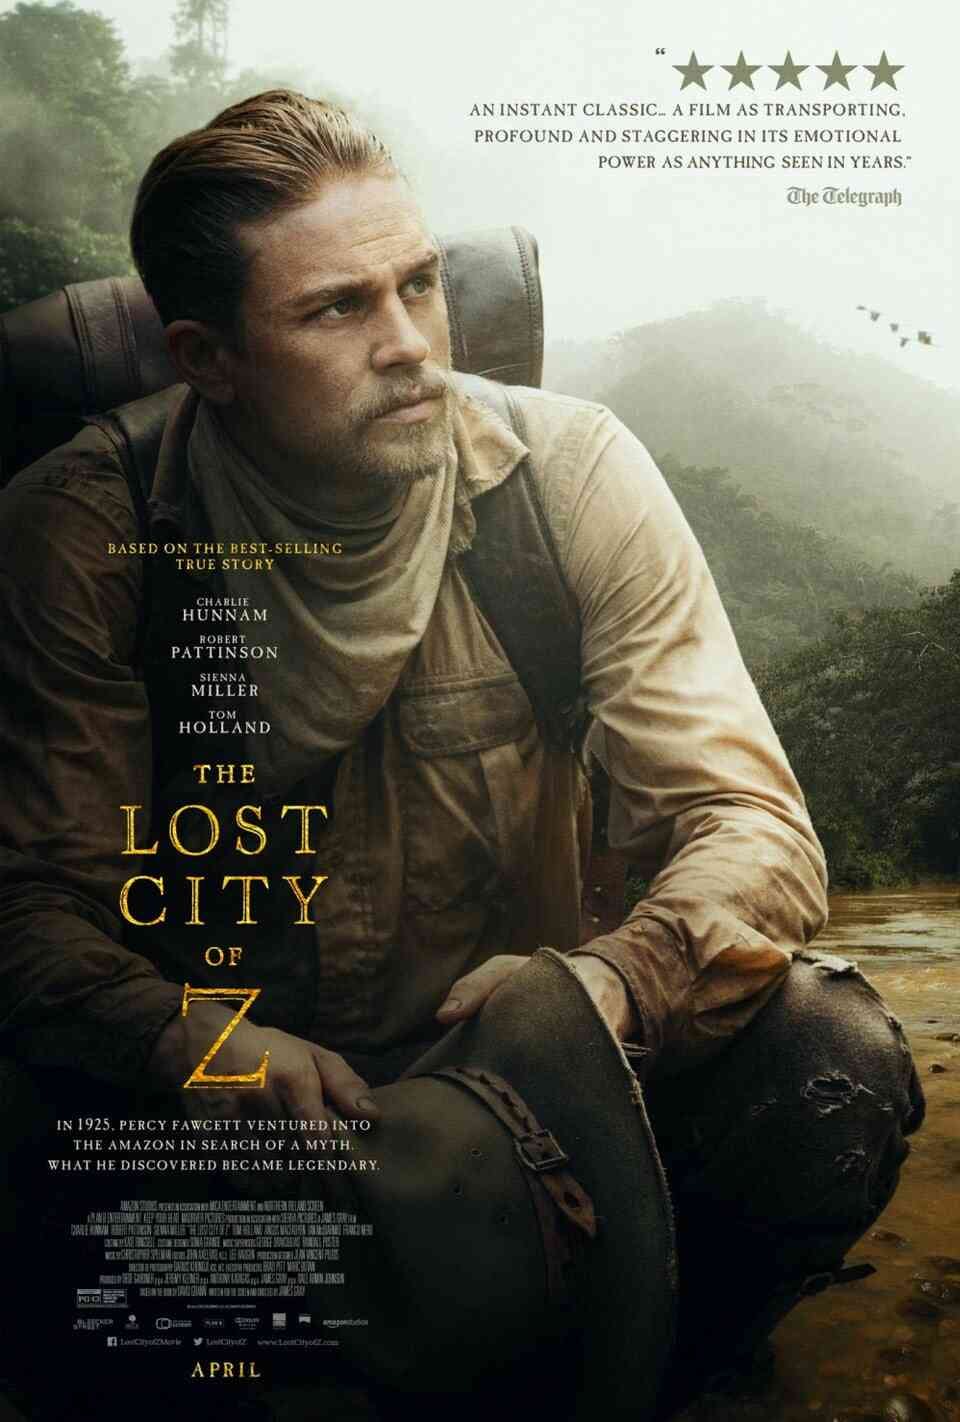 Read The Lost City of Z screenplay (poster)